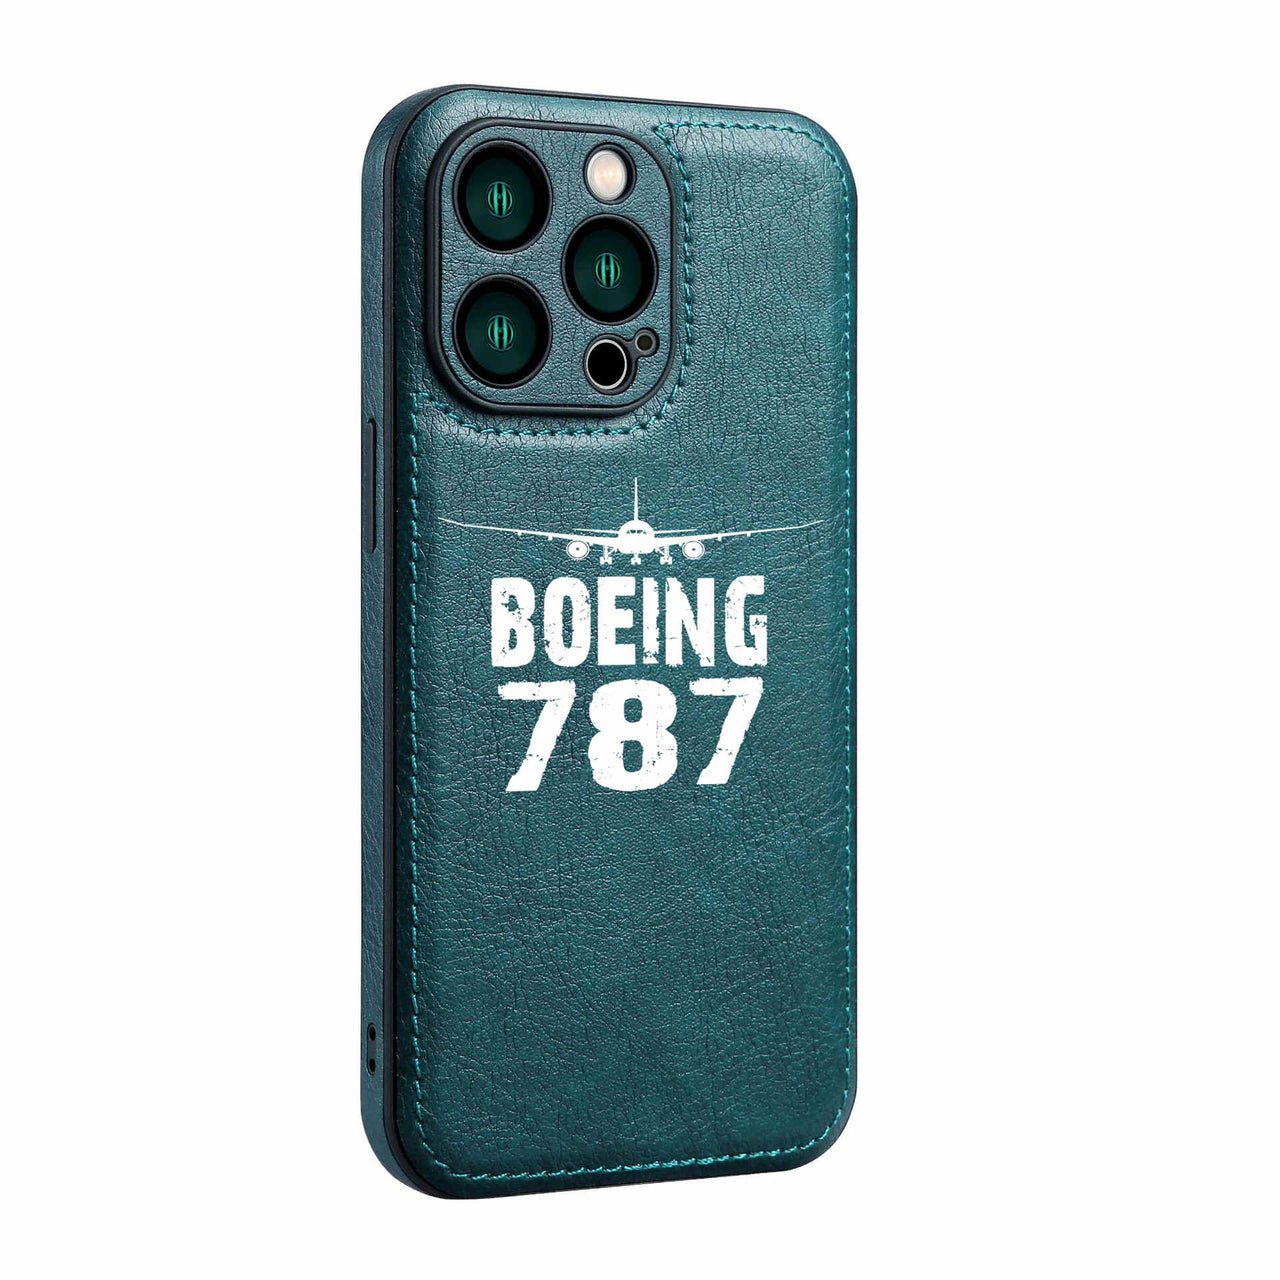 Boeing 787 & Plane Designed Leather iPhone Cases